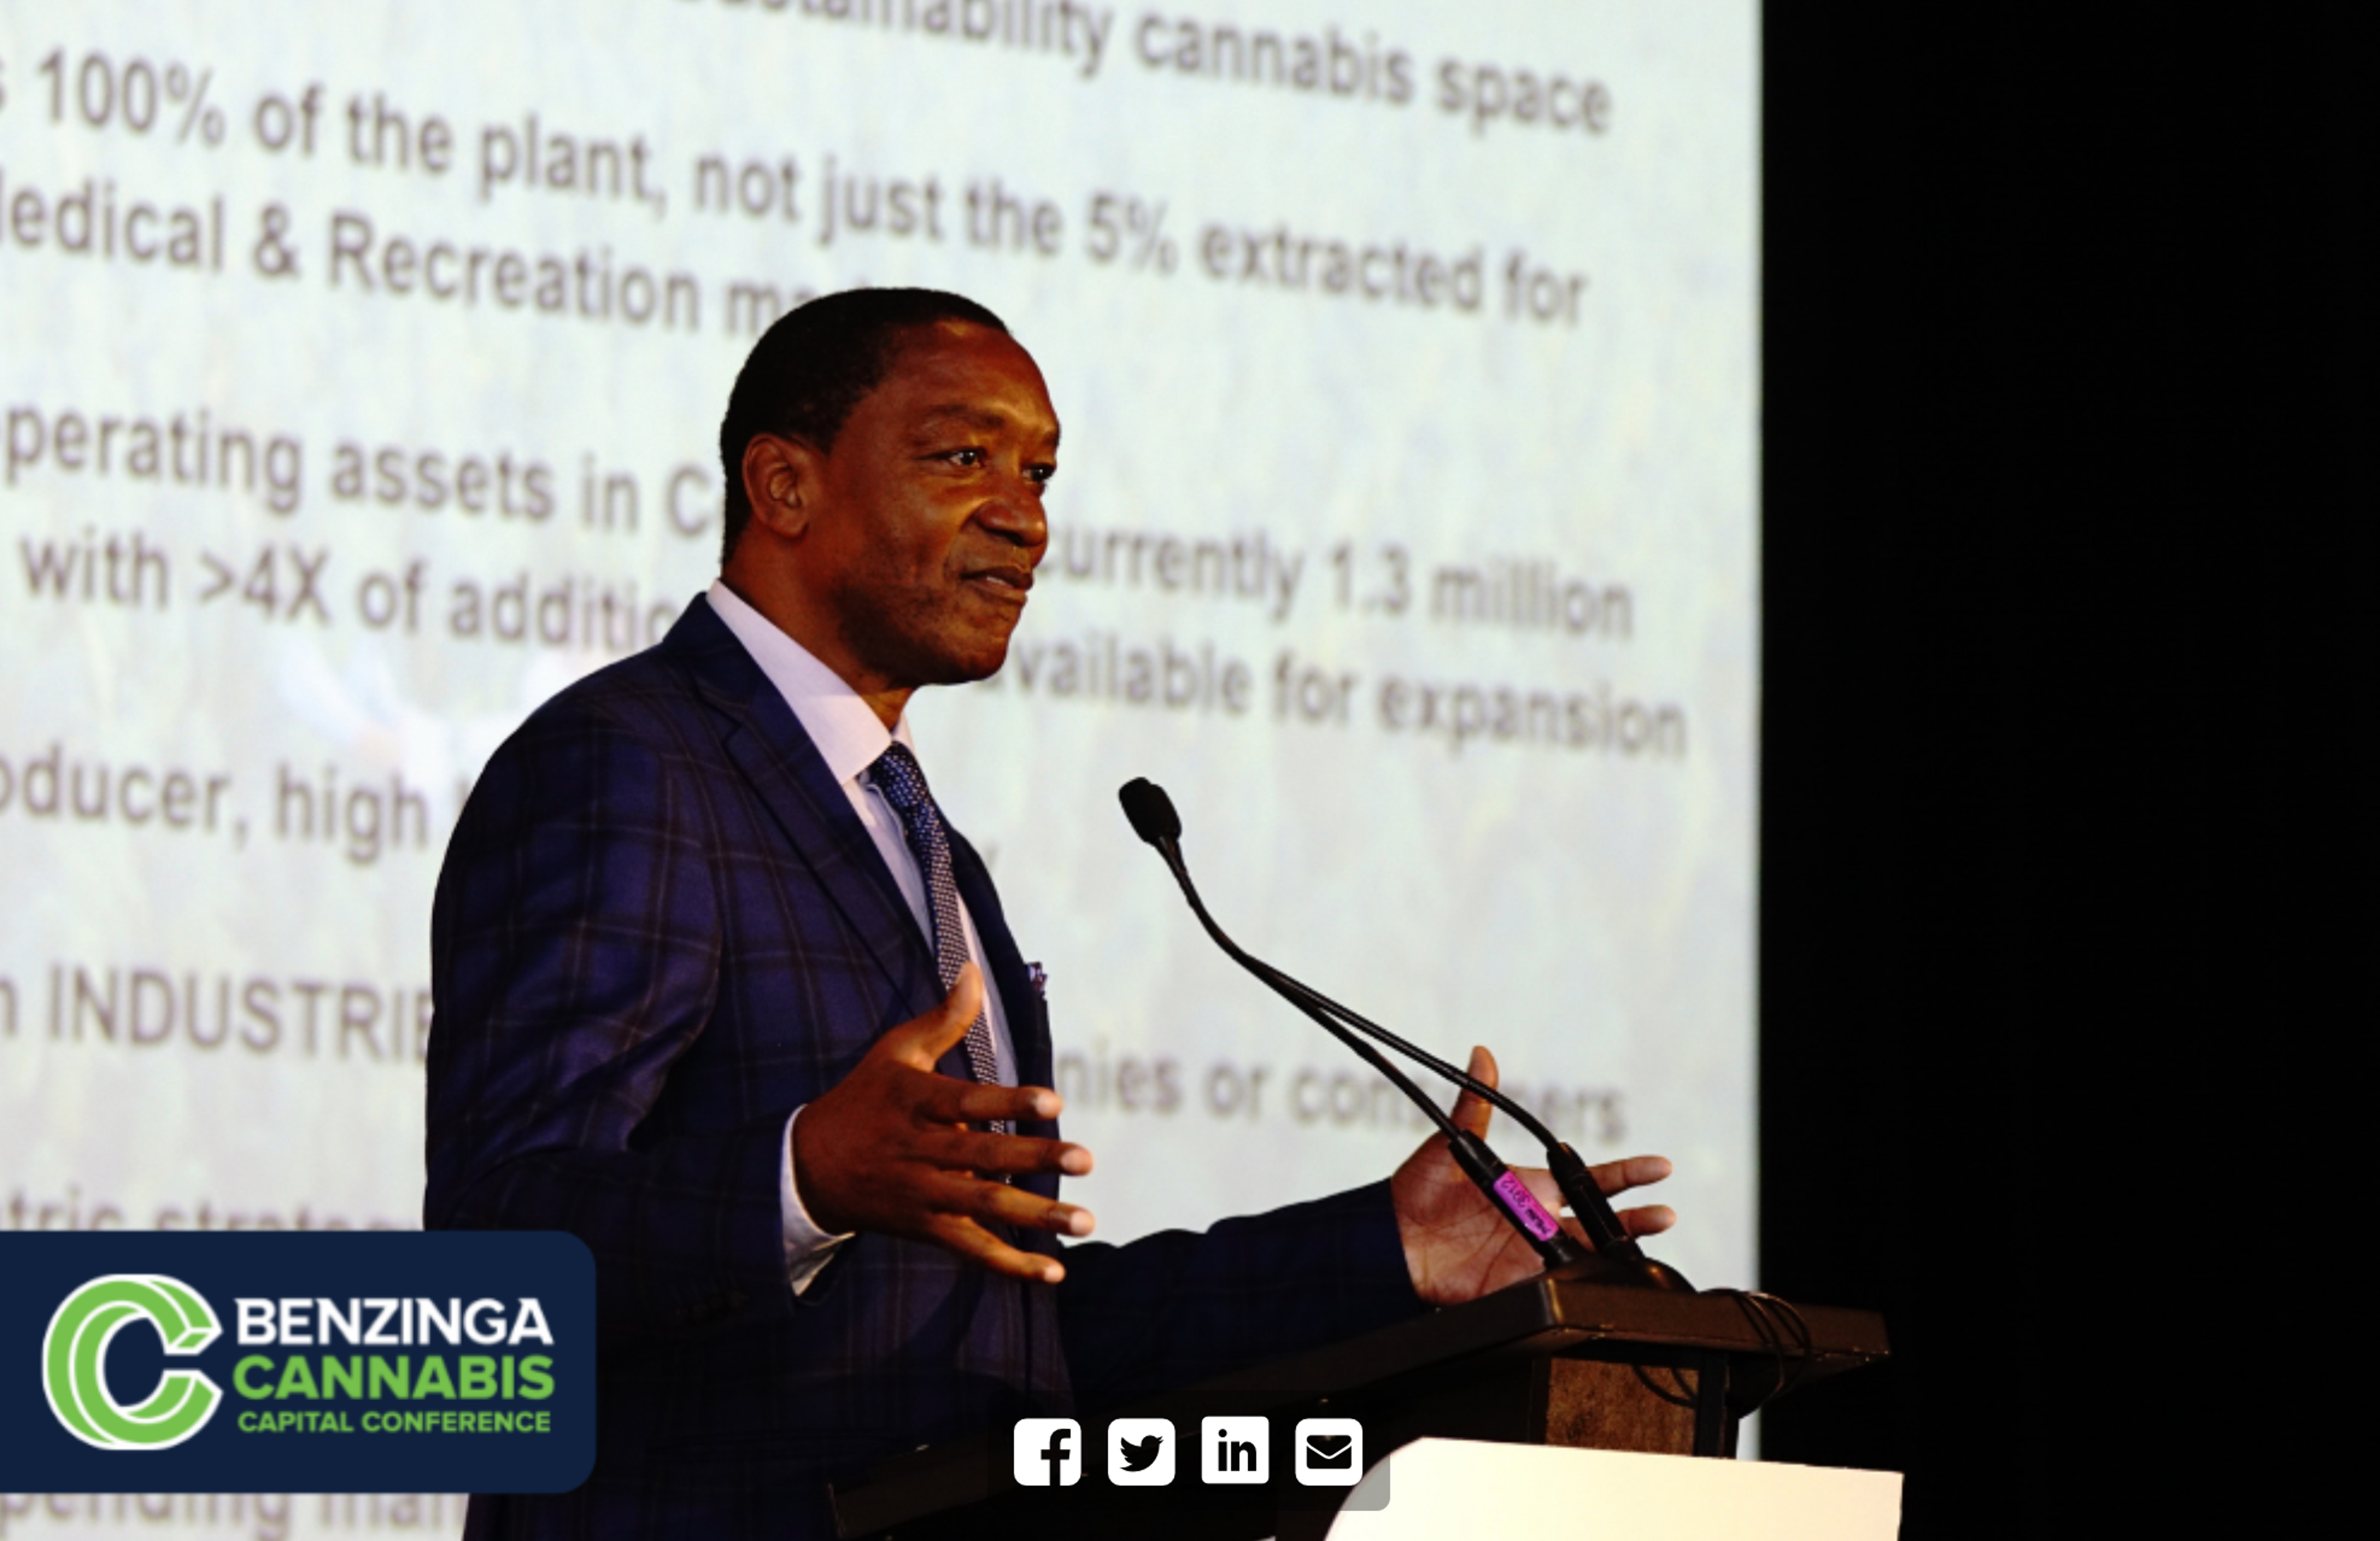 NBA Star Isiah Thomas Had A Dream Of Making Hemp Cars, And He&#39;s Making It Happen: &#39;All Plastics Will Be Made From Cannabis&#39;